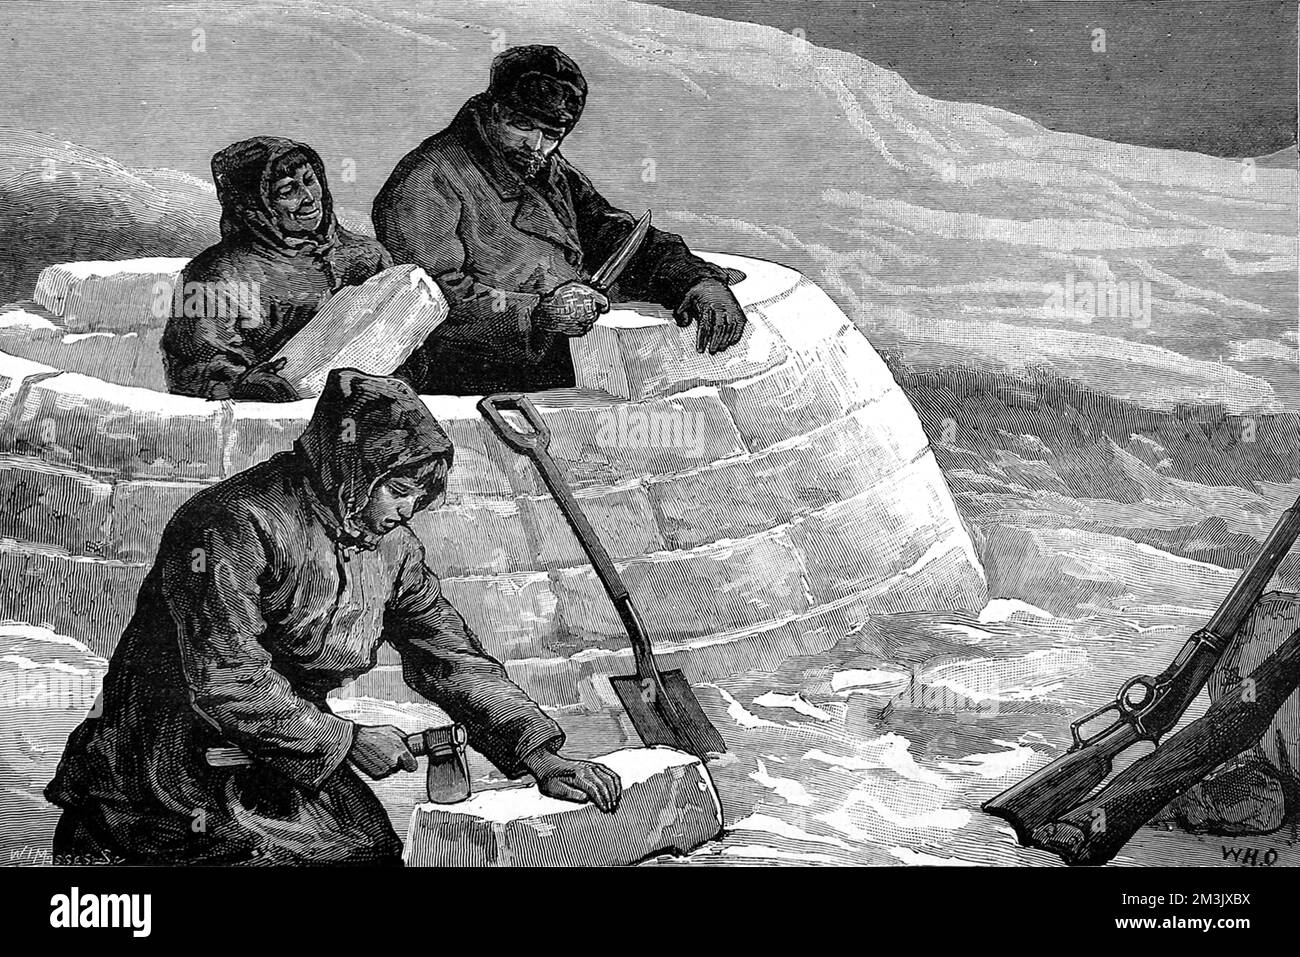 A party of the American Franklin Search Expedition of 1878-1880, making a snow house or igloo. This expedition was one of many to search the Arctic for signs of Sir John Franklin's ill-fated Arctic expedition of 1845.  In 1845 the British Admiralty sent two polar exploration ships, HMS 'Erebus' and HMS 'Terror', to look for the Northwest passage round the northern coast of Canada. The expedition, commanded by Sir John Franklin, disappeared from view late in 1845 and none of the men were ever seen again.   In fact the ships made it to the King William Island region, then got stuck in the i Stock Photo